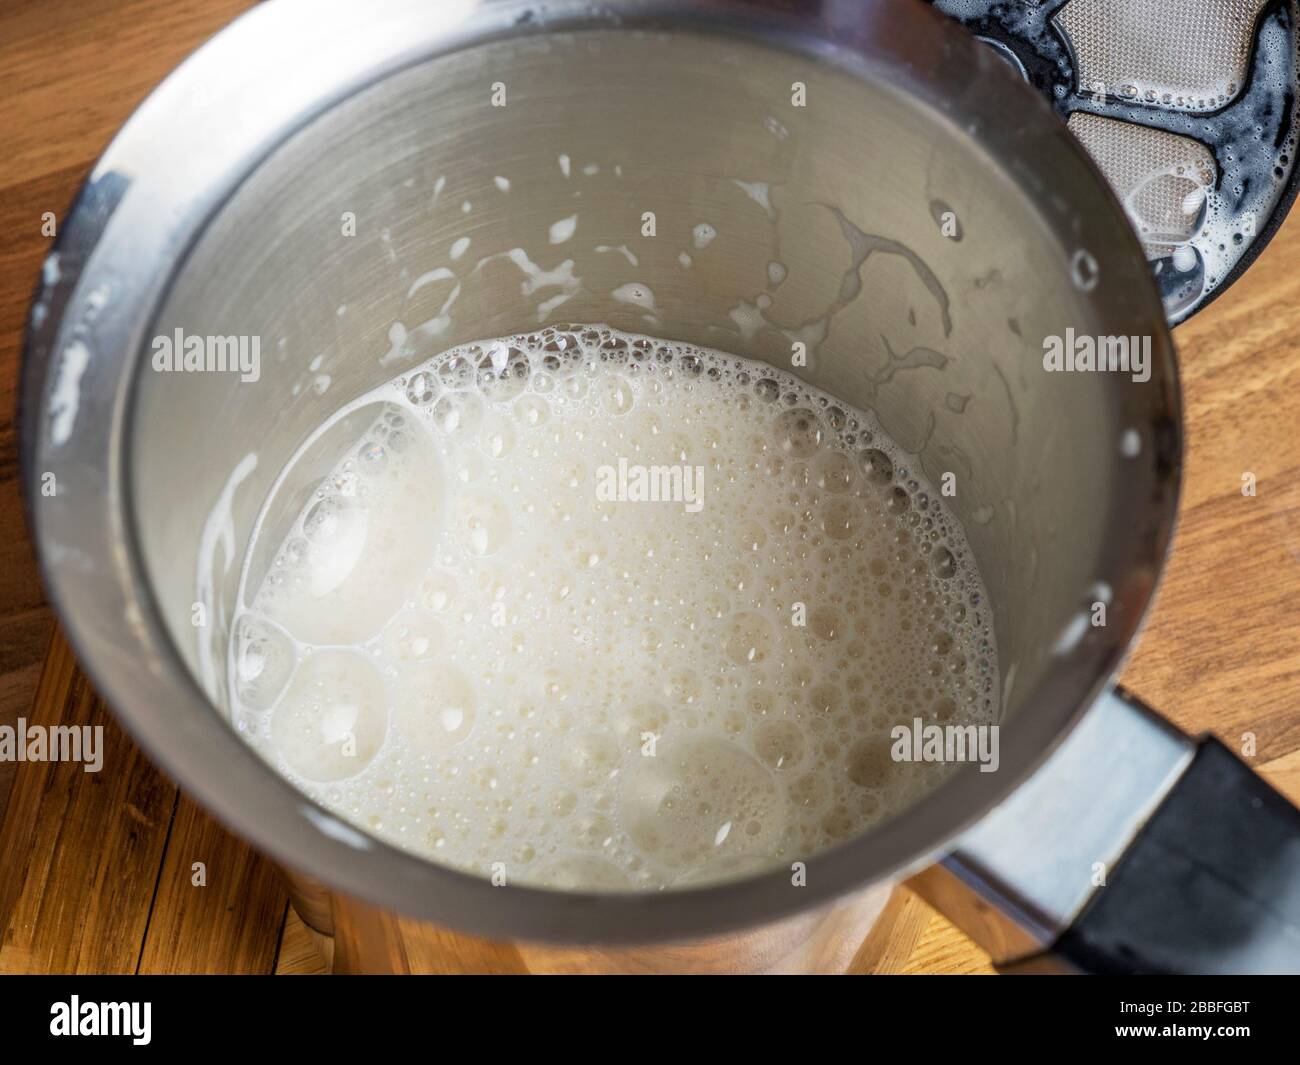 https://c8.alamy.com/comp/2BBFGBT/frothy-barista-style-oat-milk-in-a-stainless-steel-milk-frother-2BBFGBT.jpg